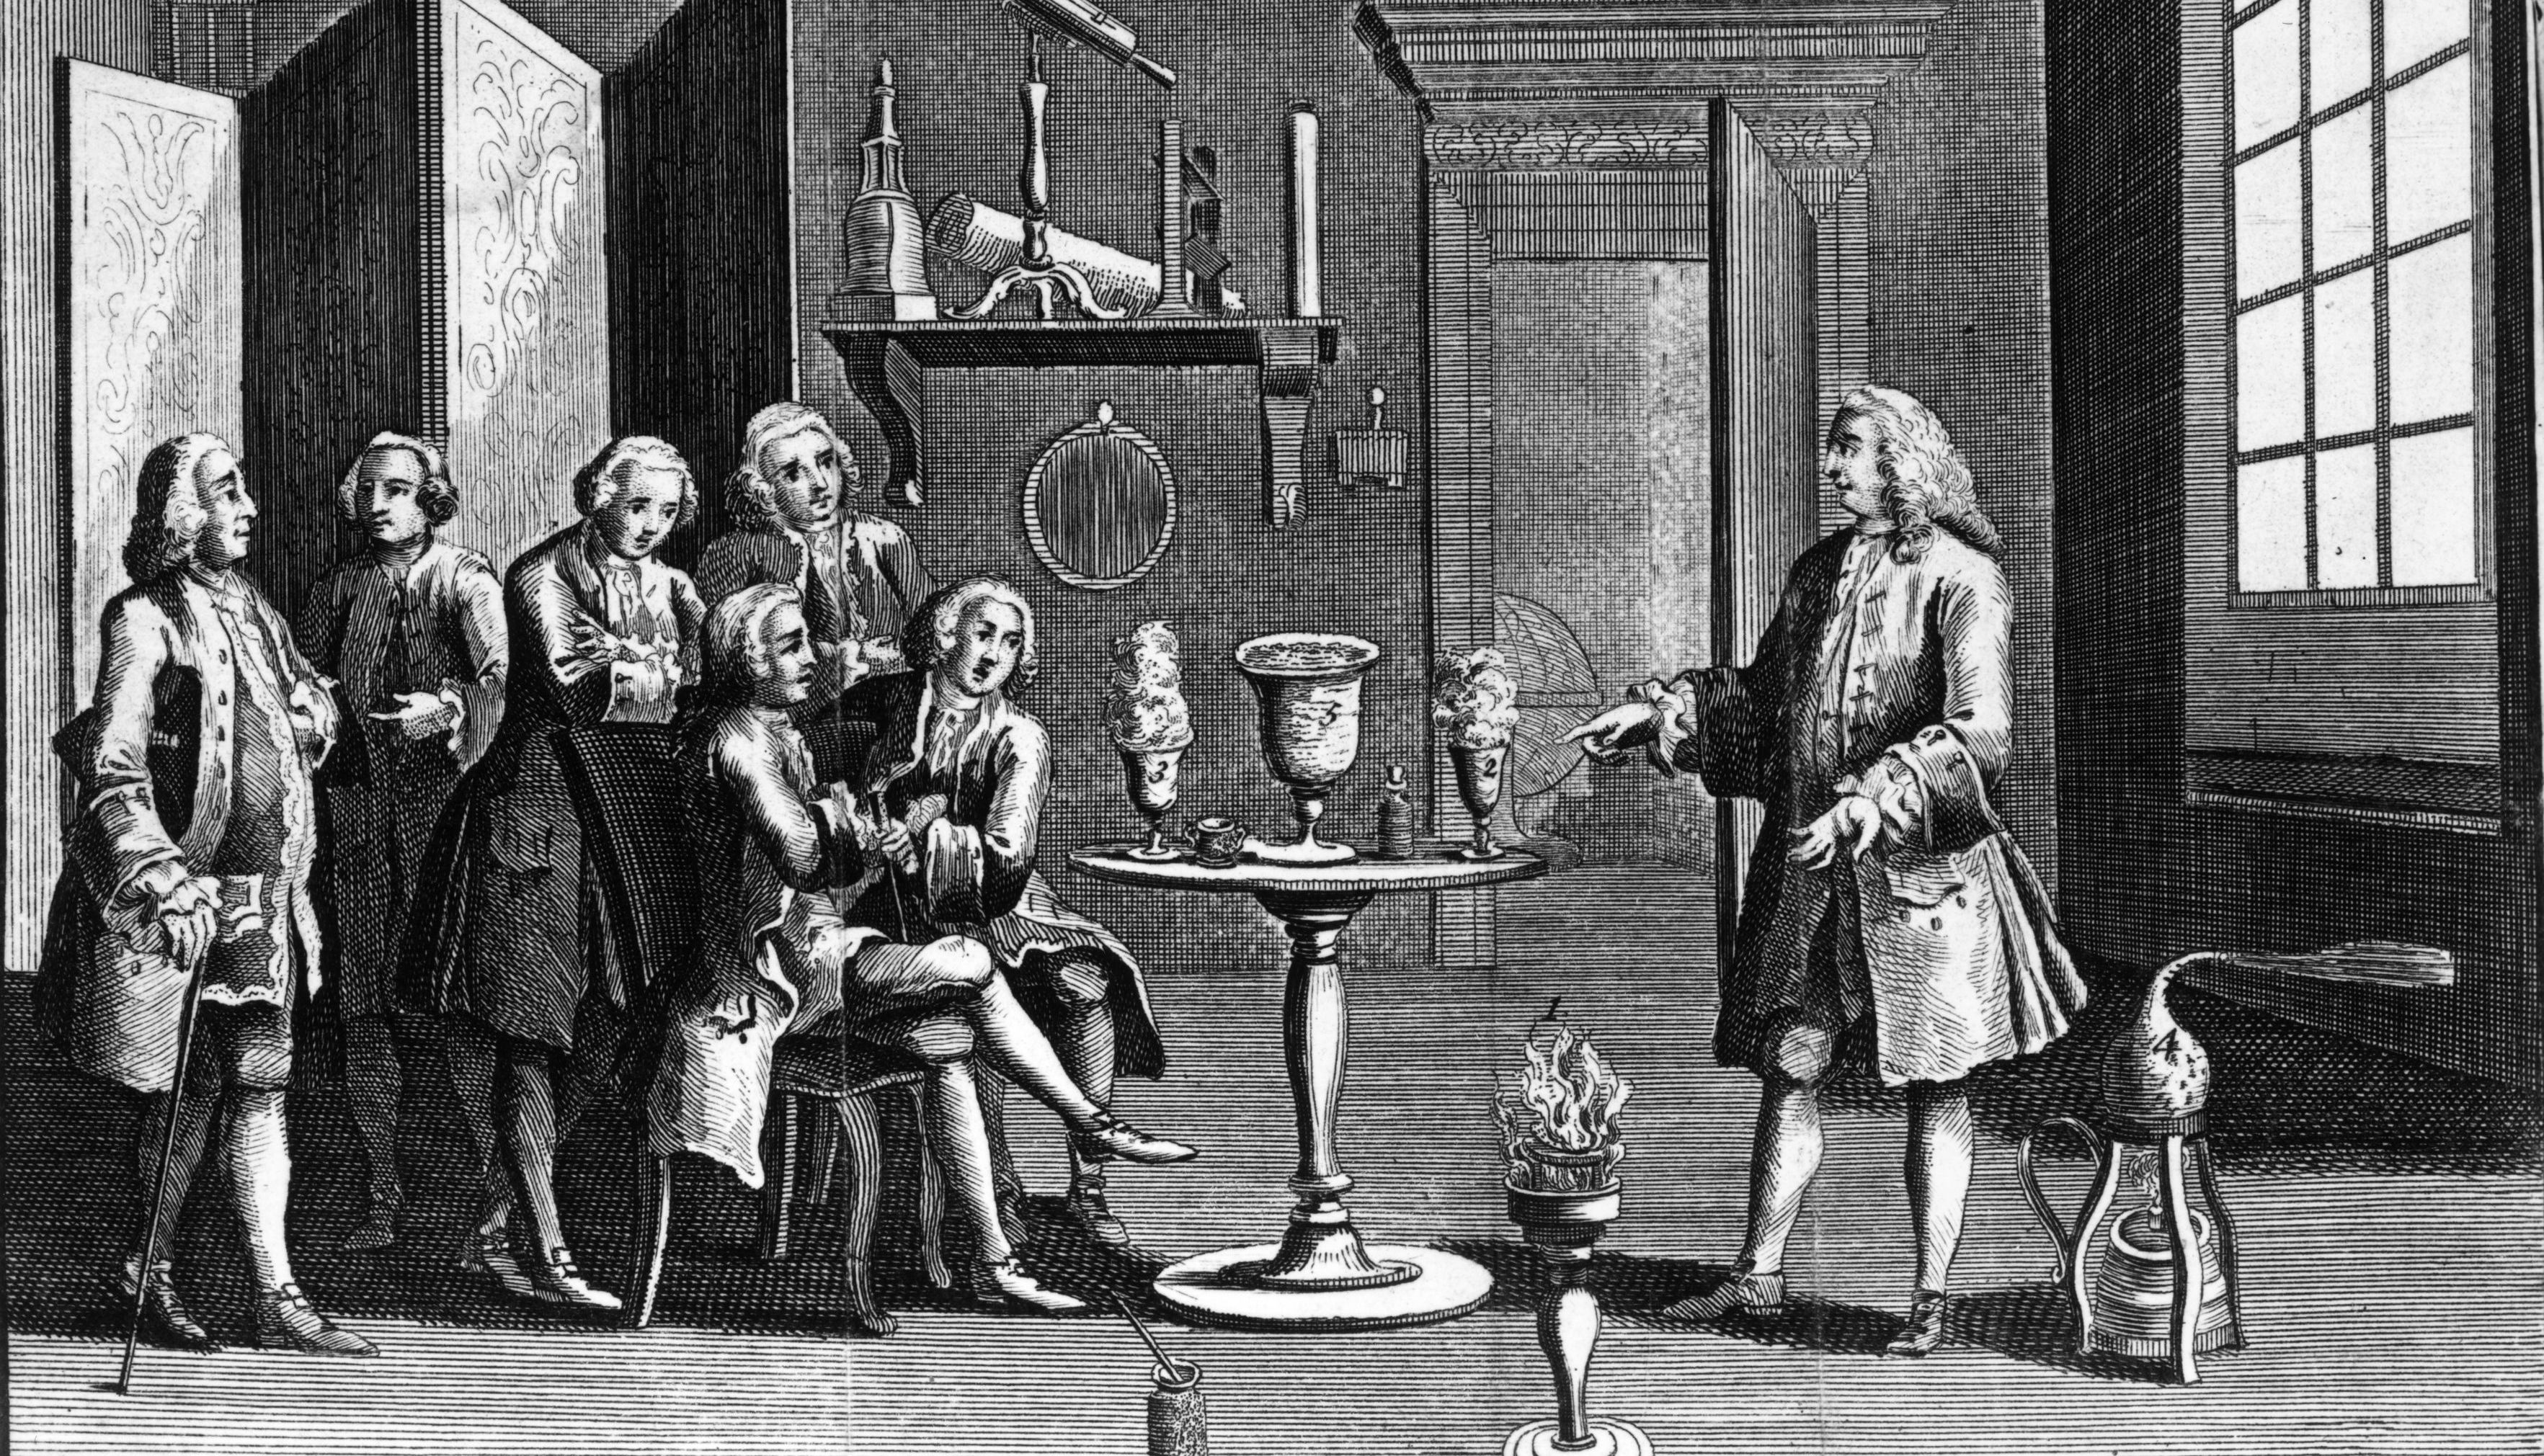 1748, A scientist demonstrates an electrical experiment at a meeting of a scientific society in London. (Photo by MPI/Getty Images)